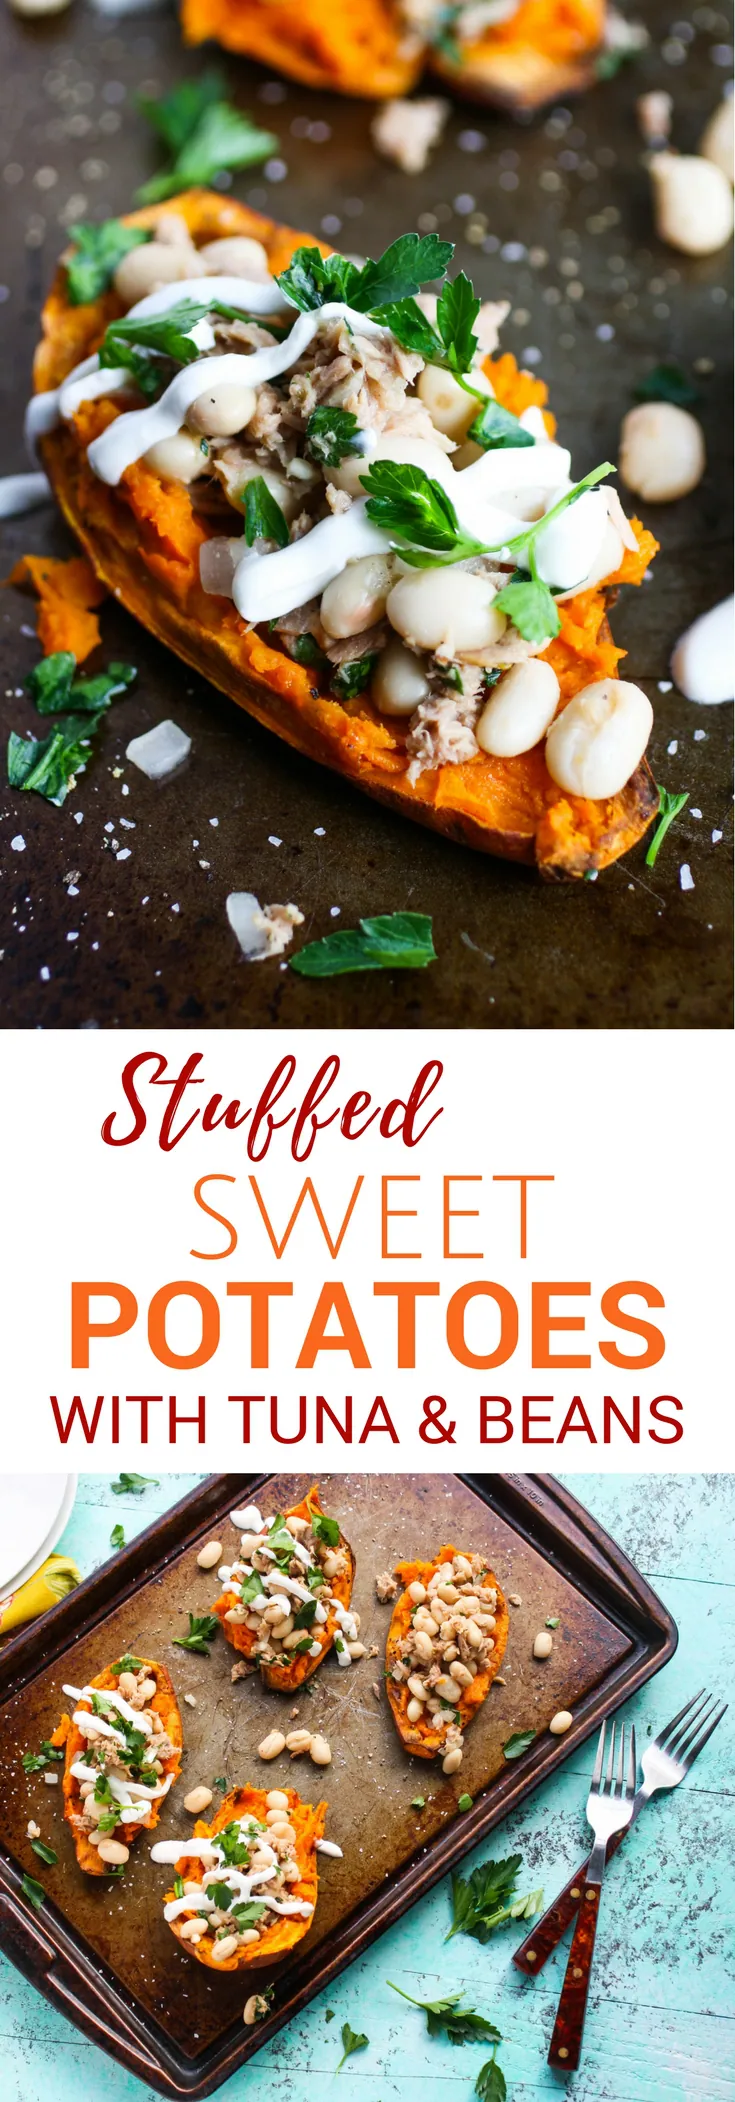 Stuffed Sweet Potatoes with Tuna and Beans are so tasty! You'll devour these stuffed sweet potatoes -- they're easy to make and so tasty, too!